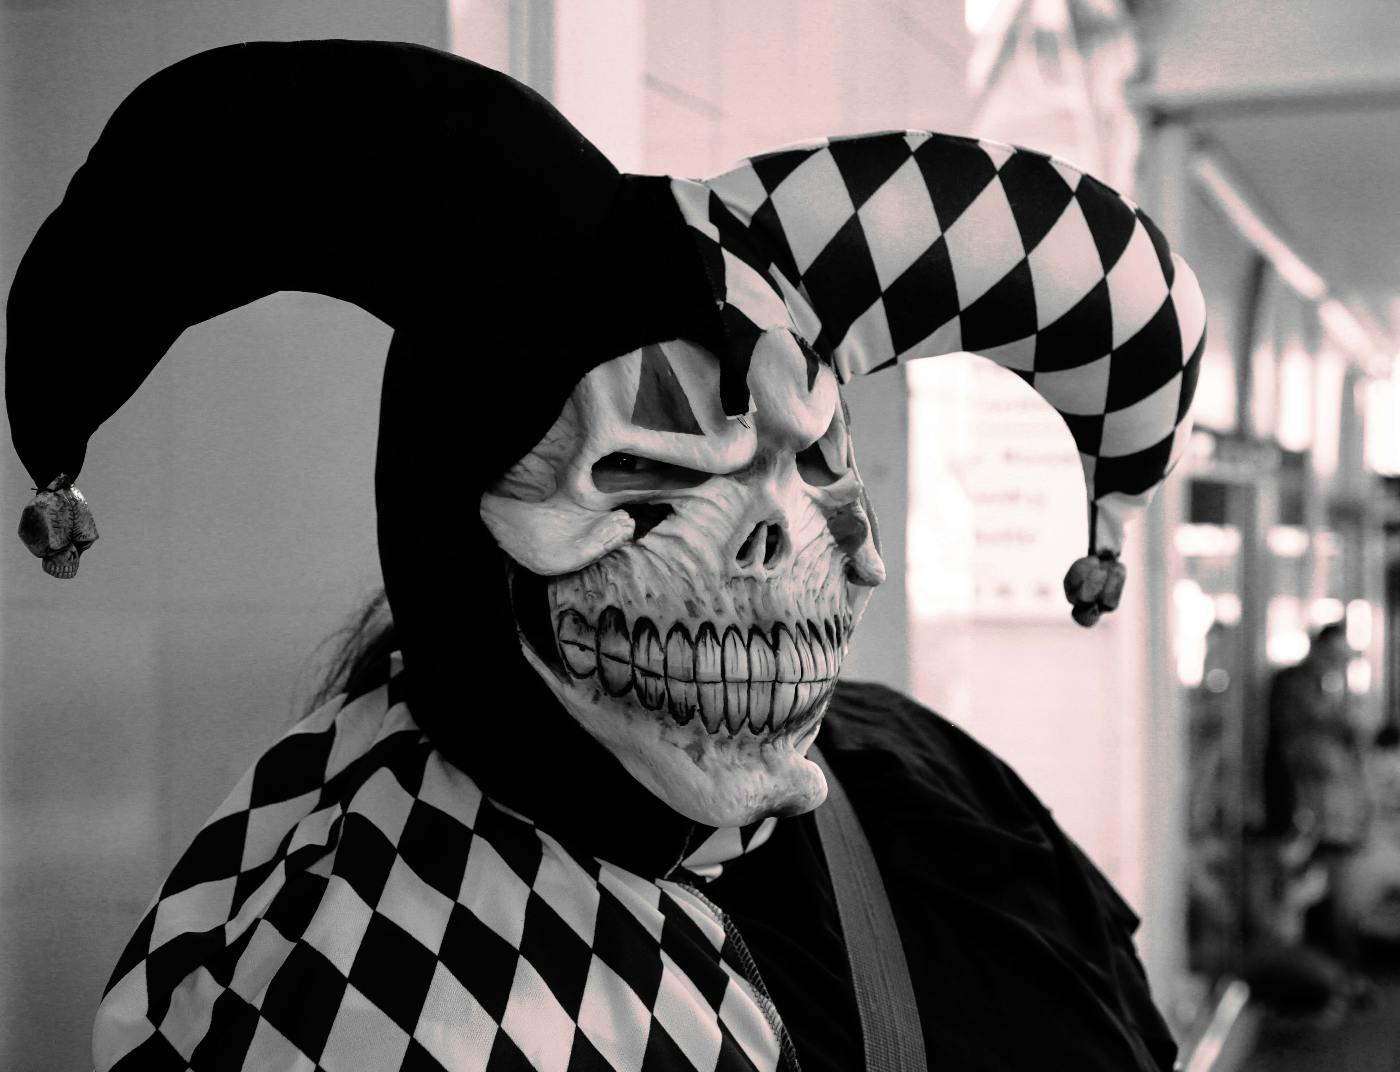 A skull in a black and white jester costume